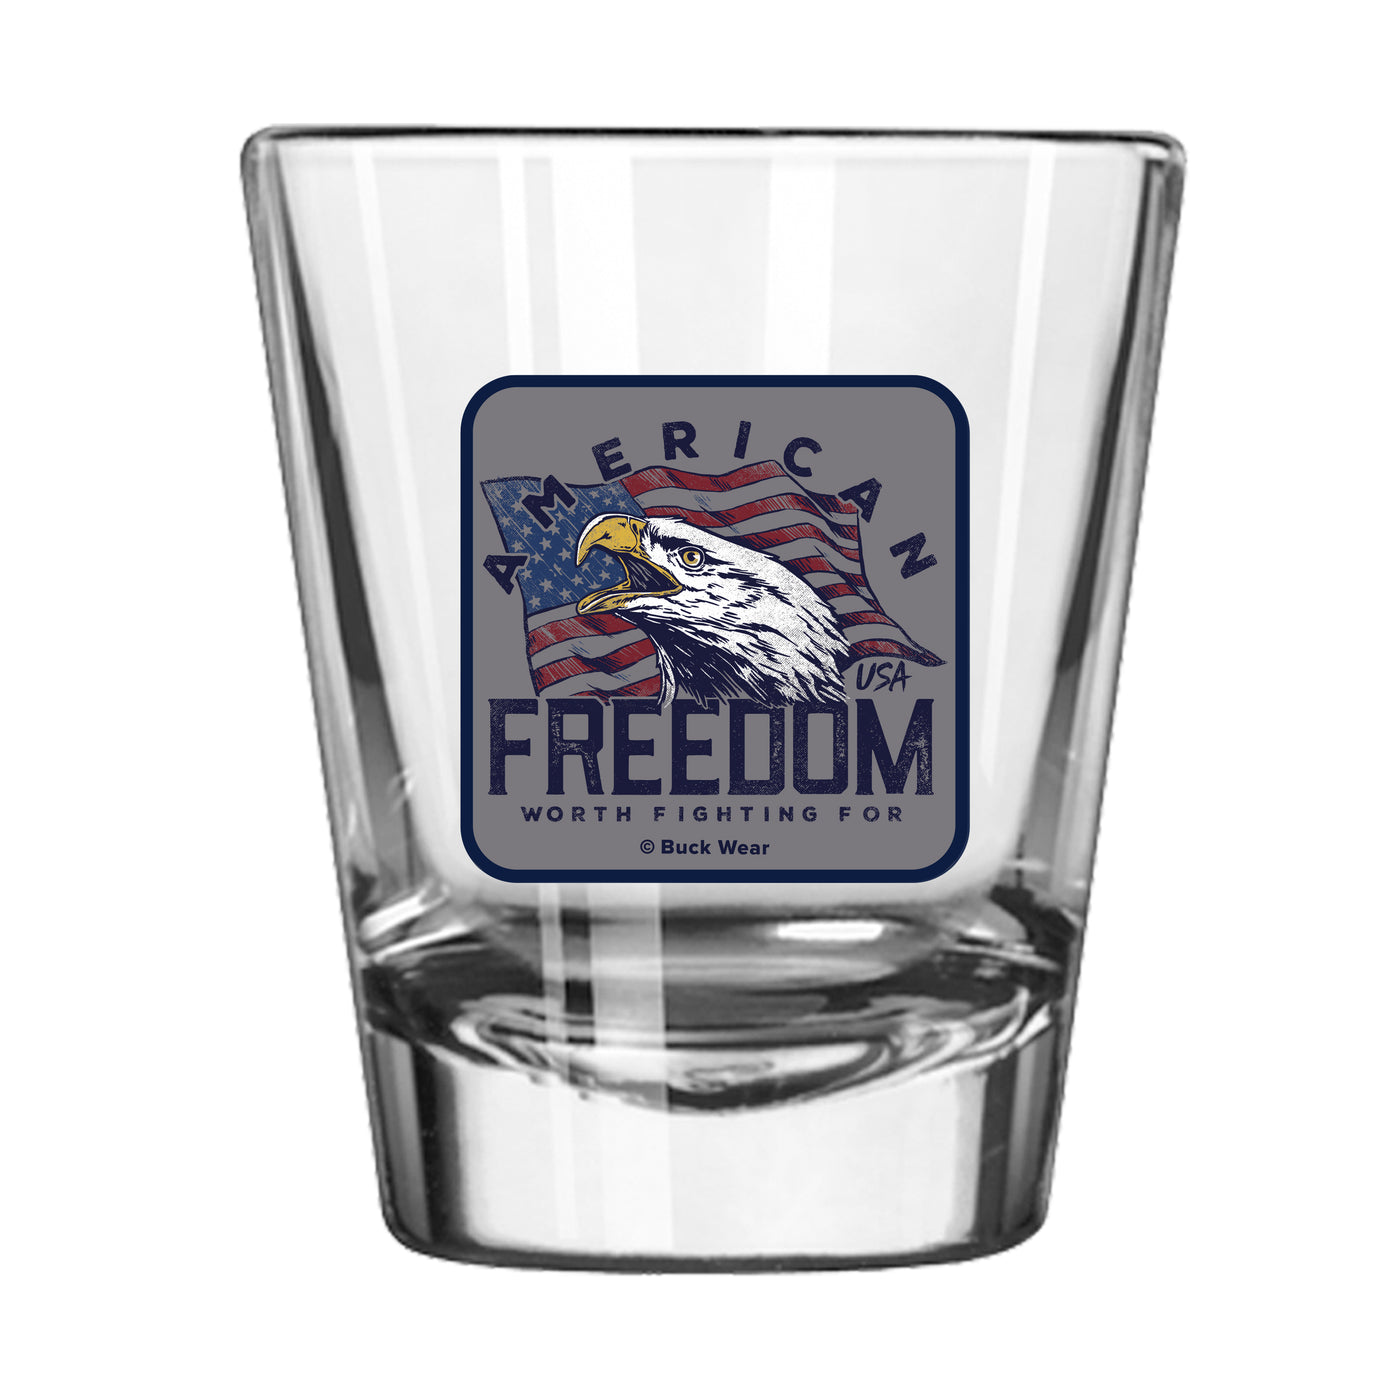 Eagle Worth Fighting For 2oz Shot Glass